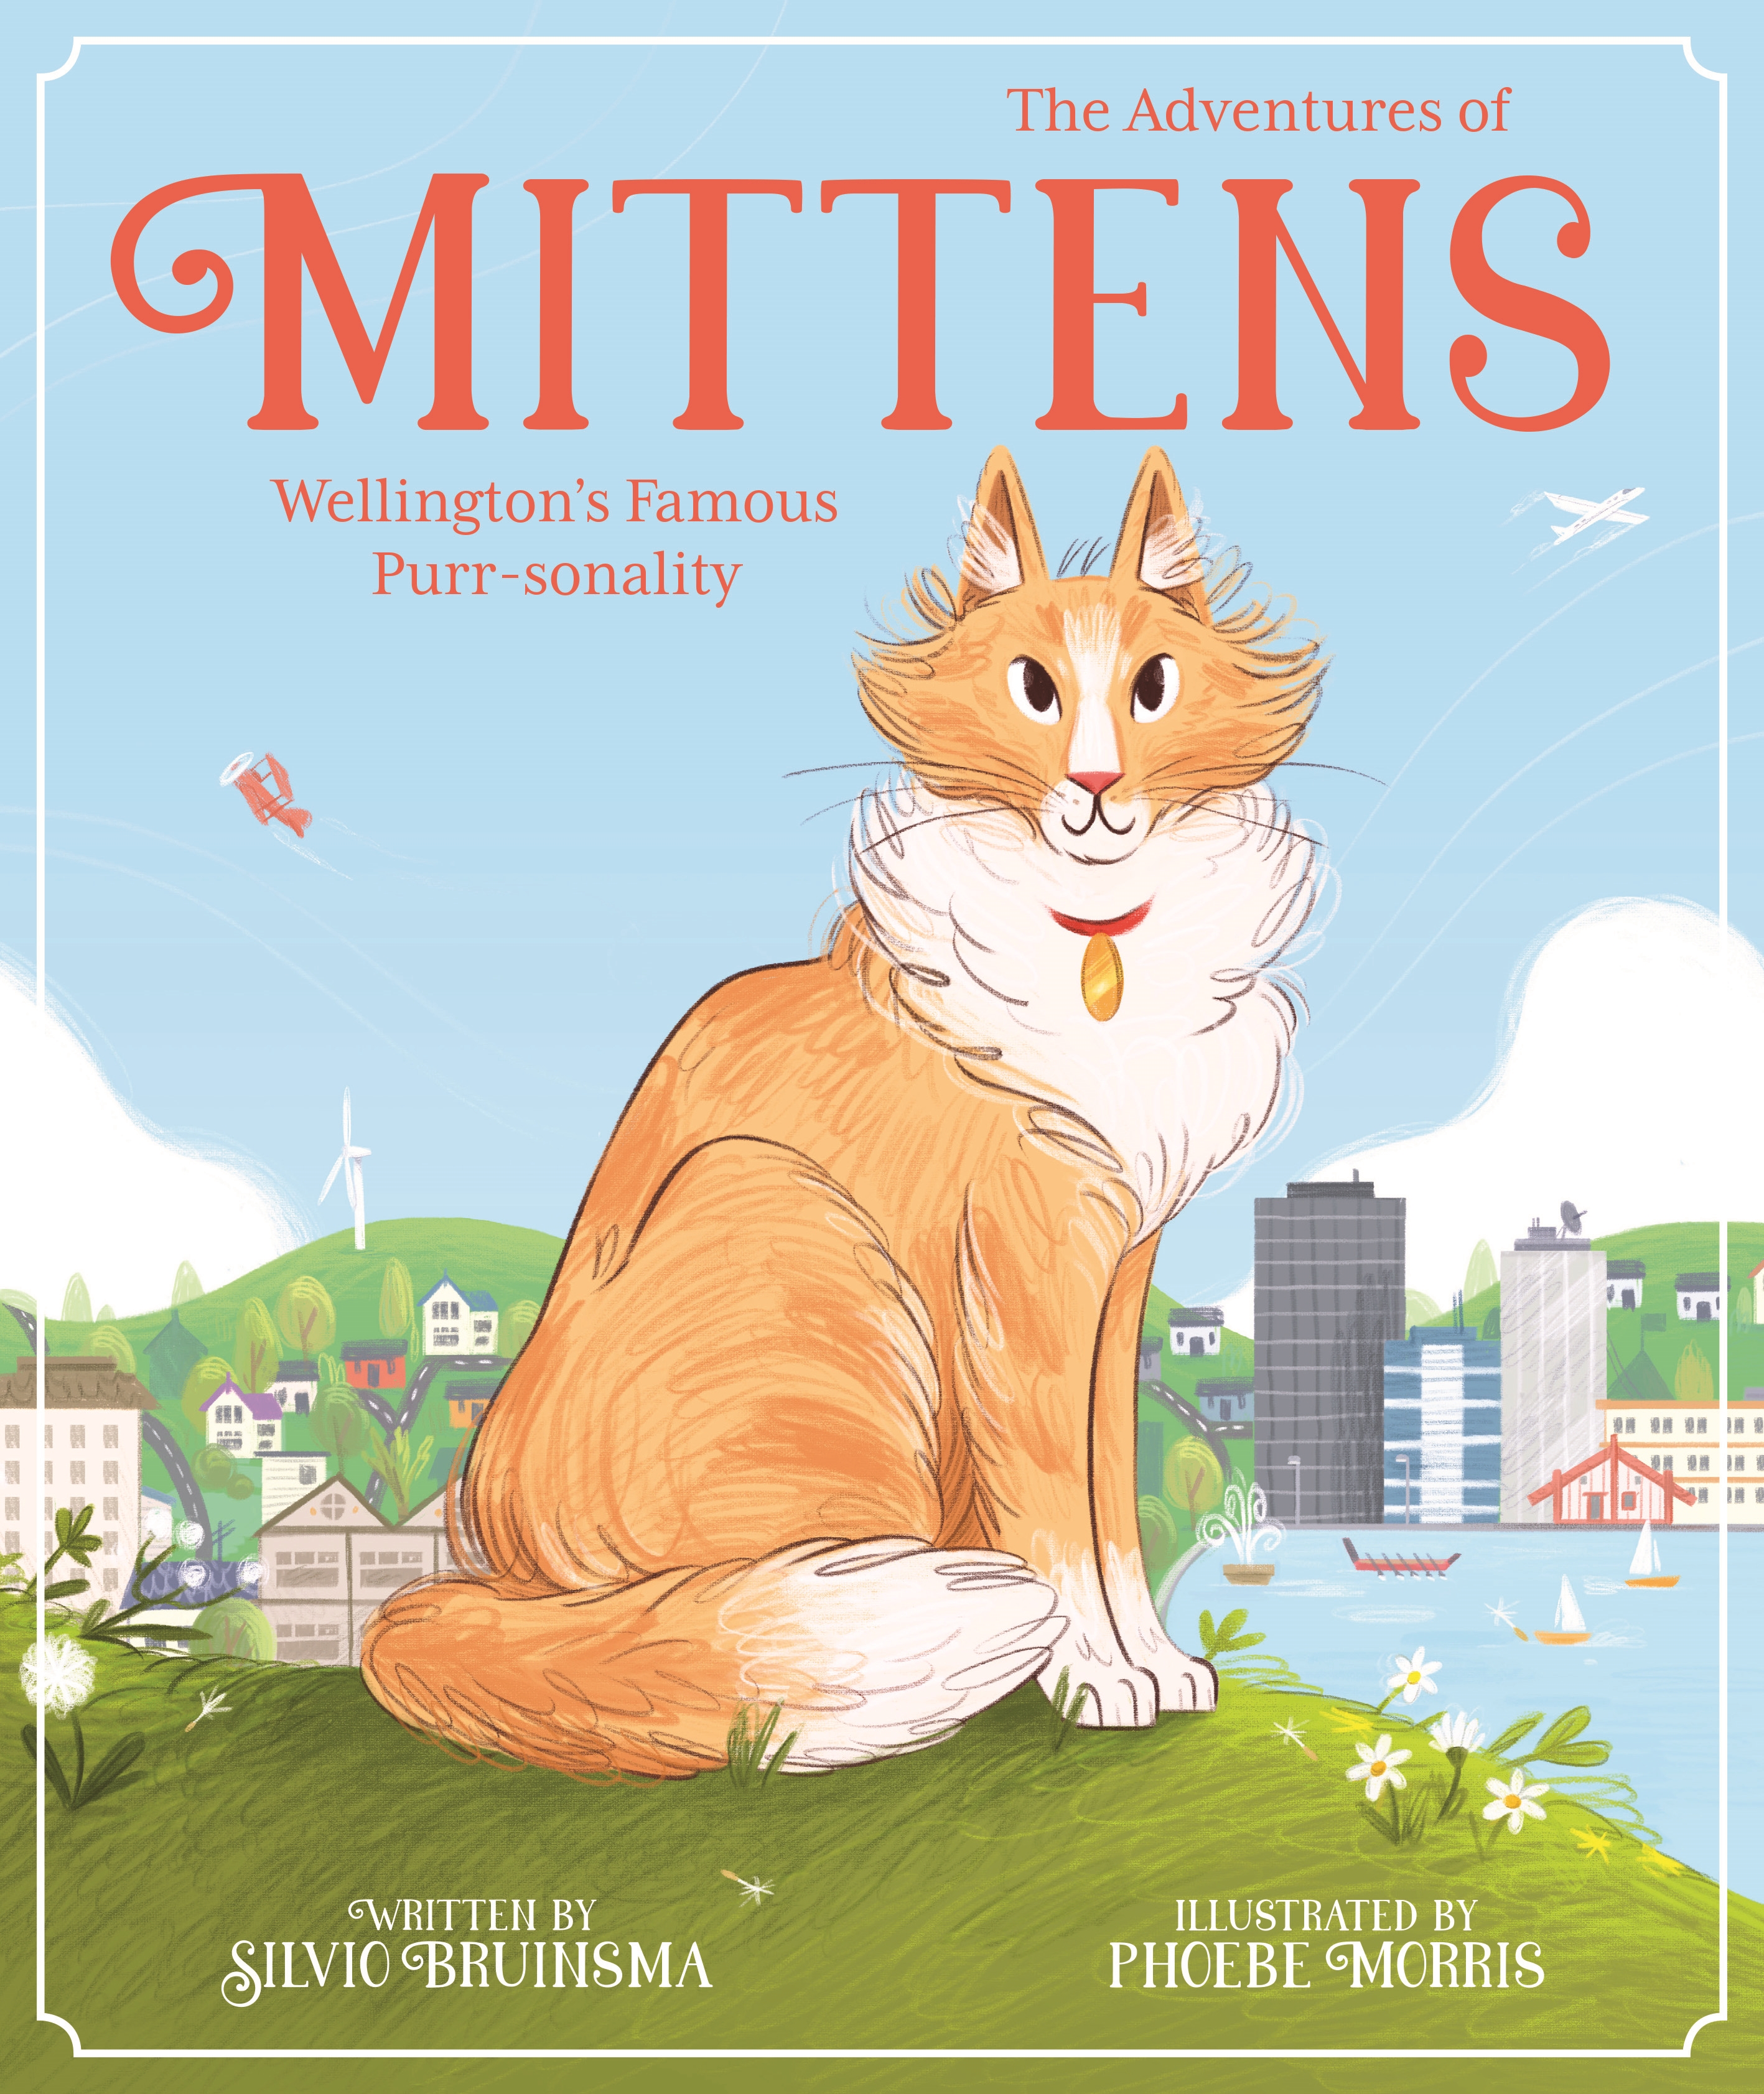 The Adventures of Mittens by Silvio Bruinsma - Penguin Books New Zealand